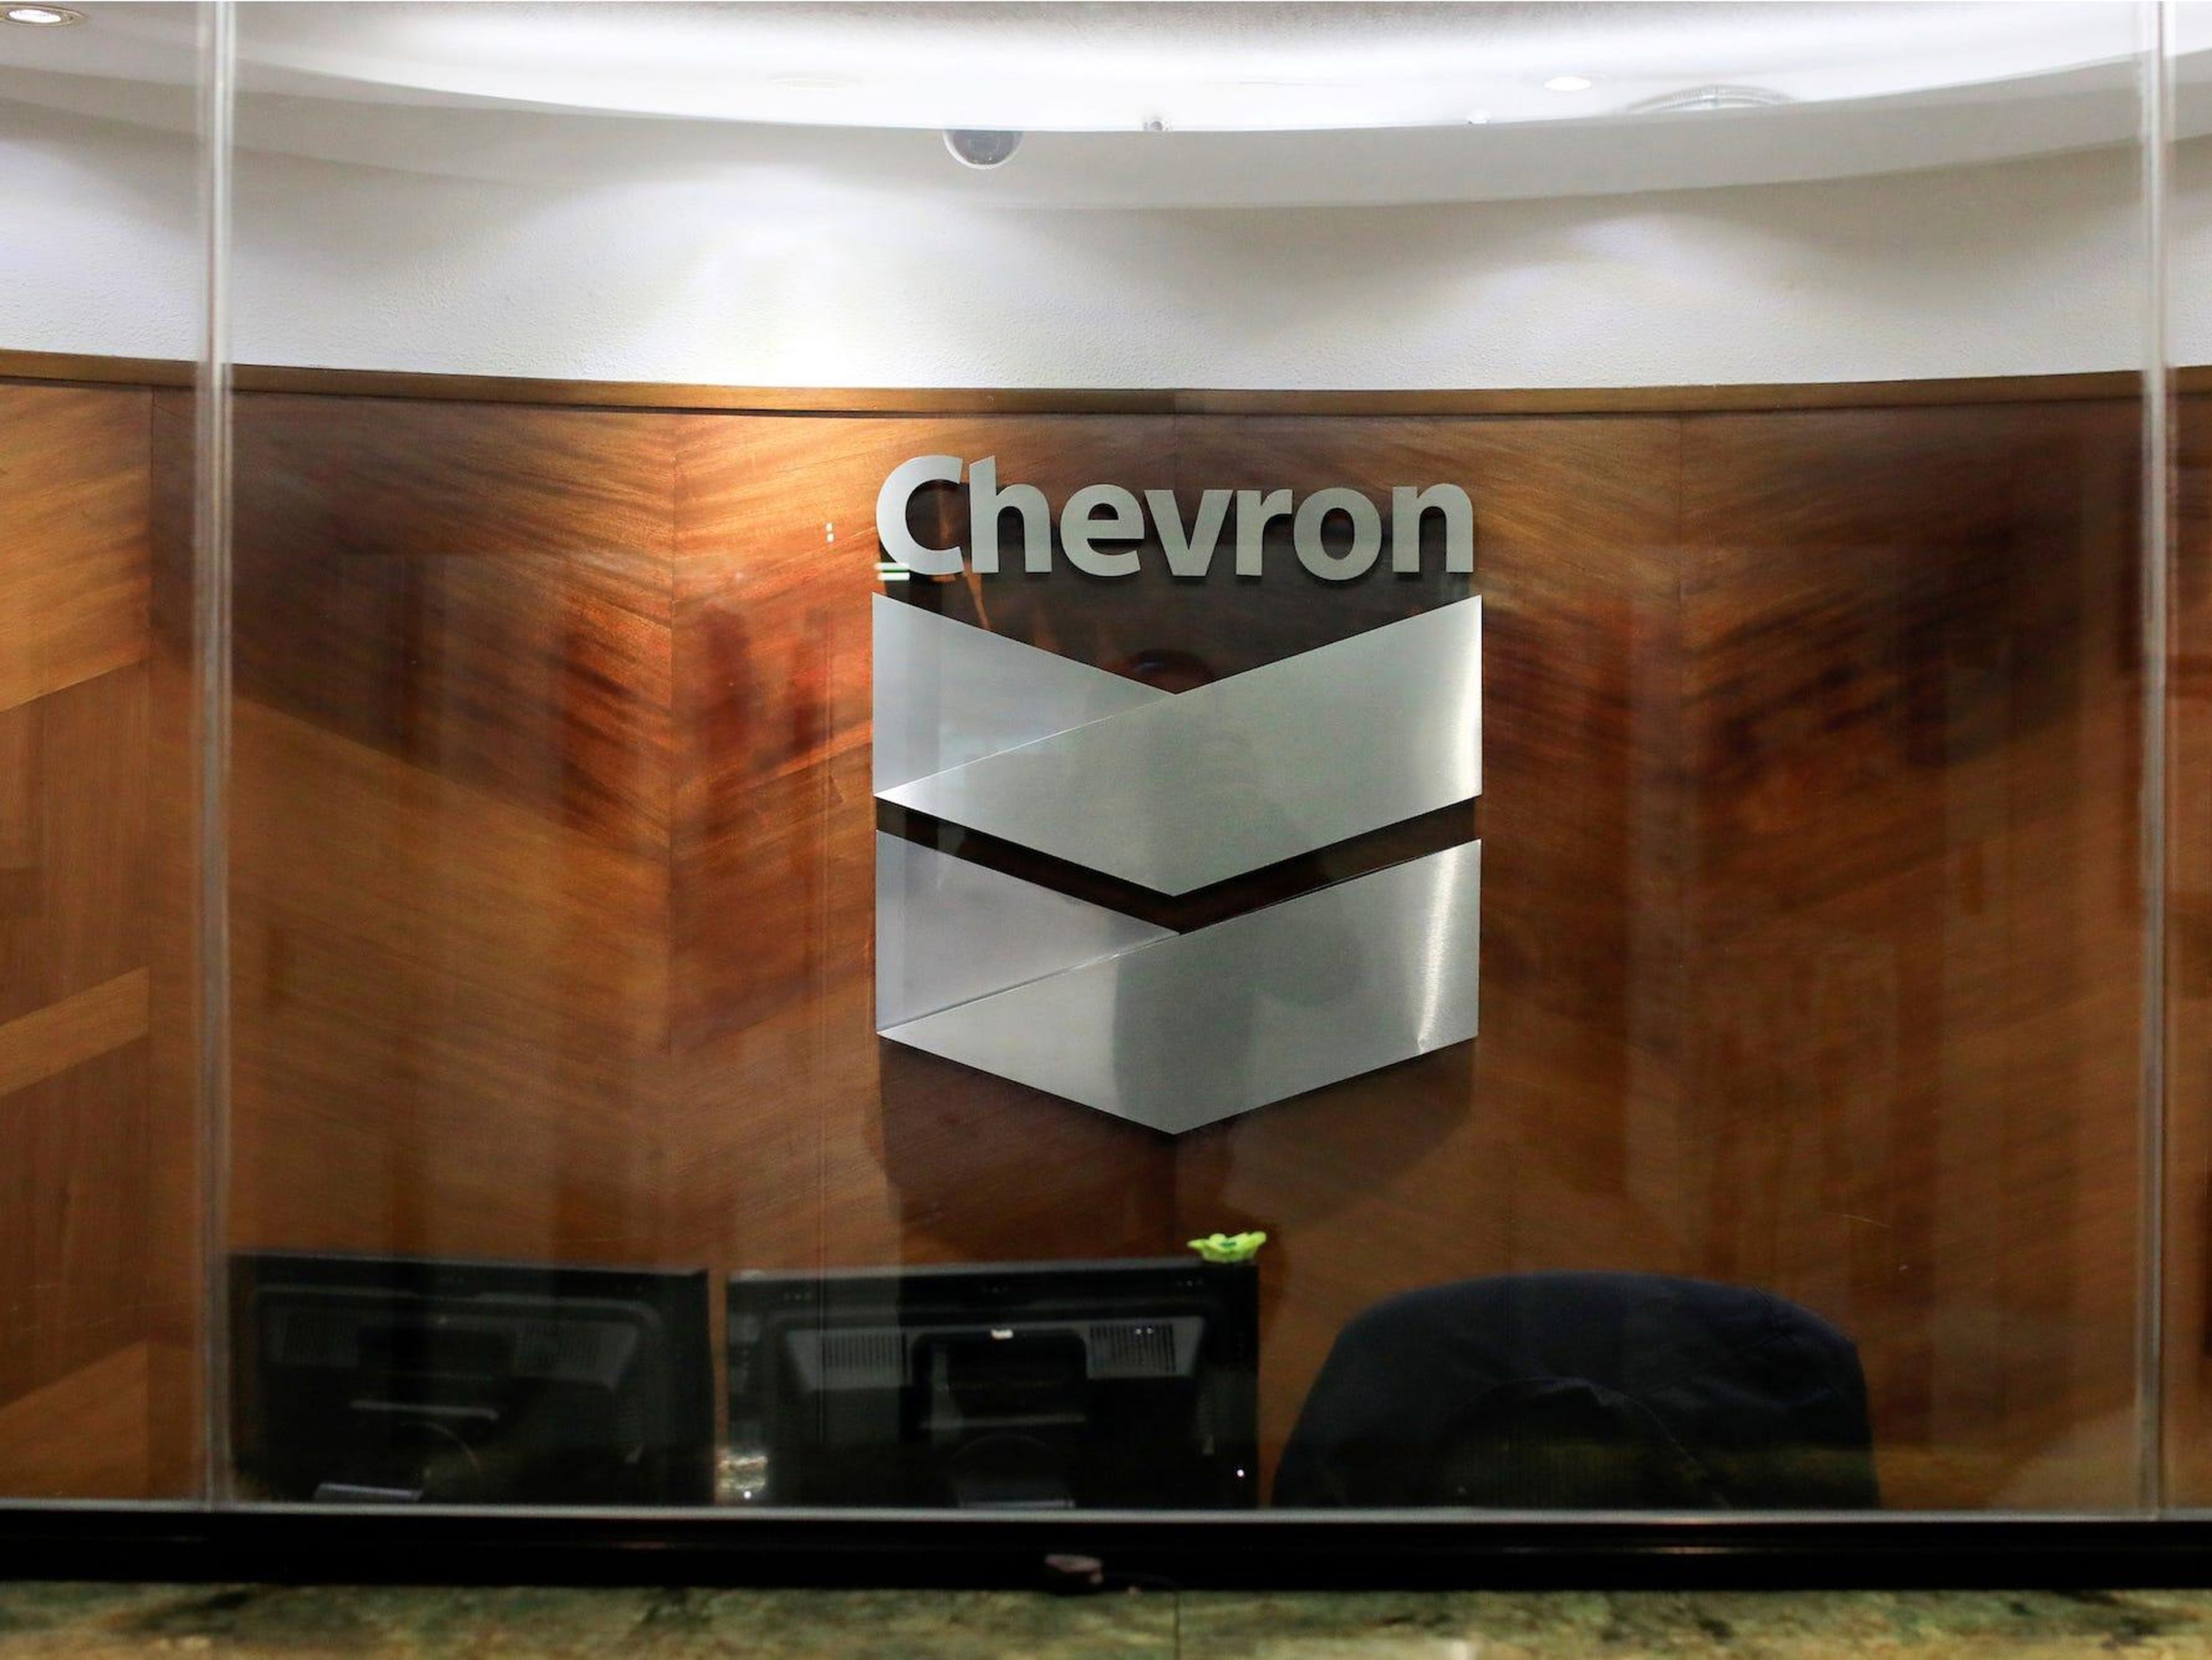 A Chevron office, also in London, asked its several hundred employees to work from home after an employee was tested for coronavirus. "Our primary concern is the health and safety of our employees and we are taking precautionary